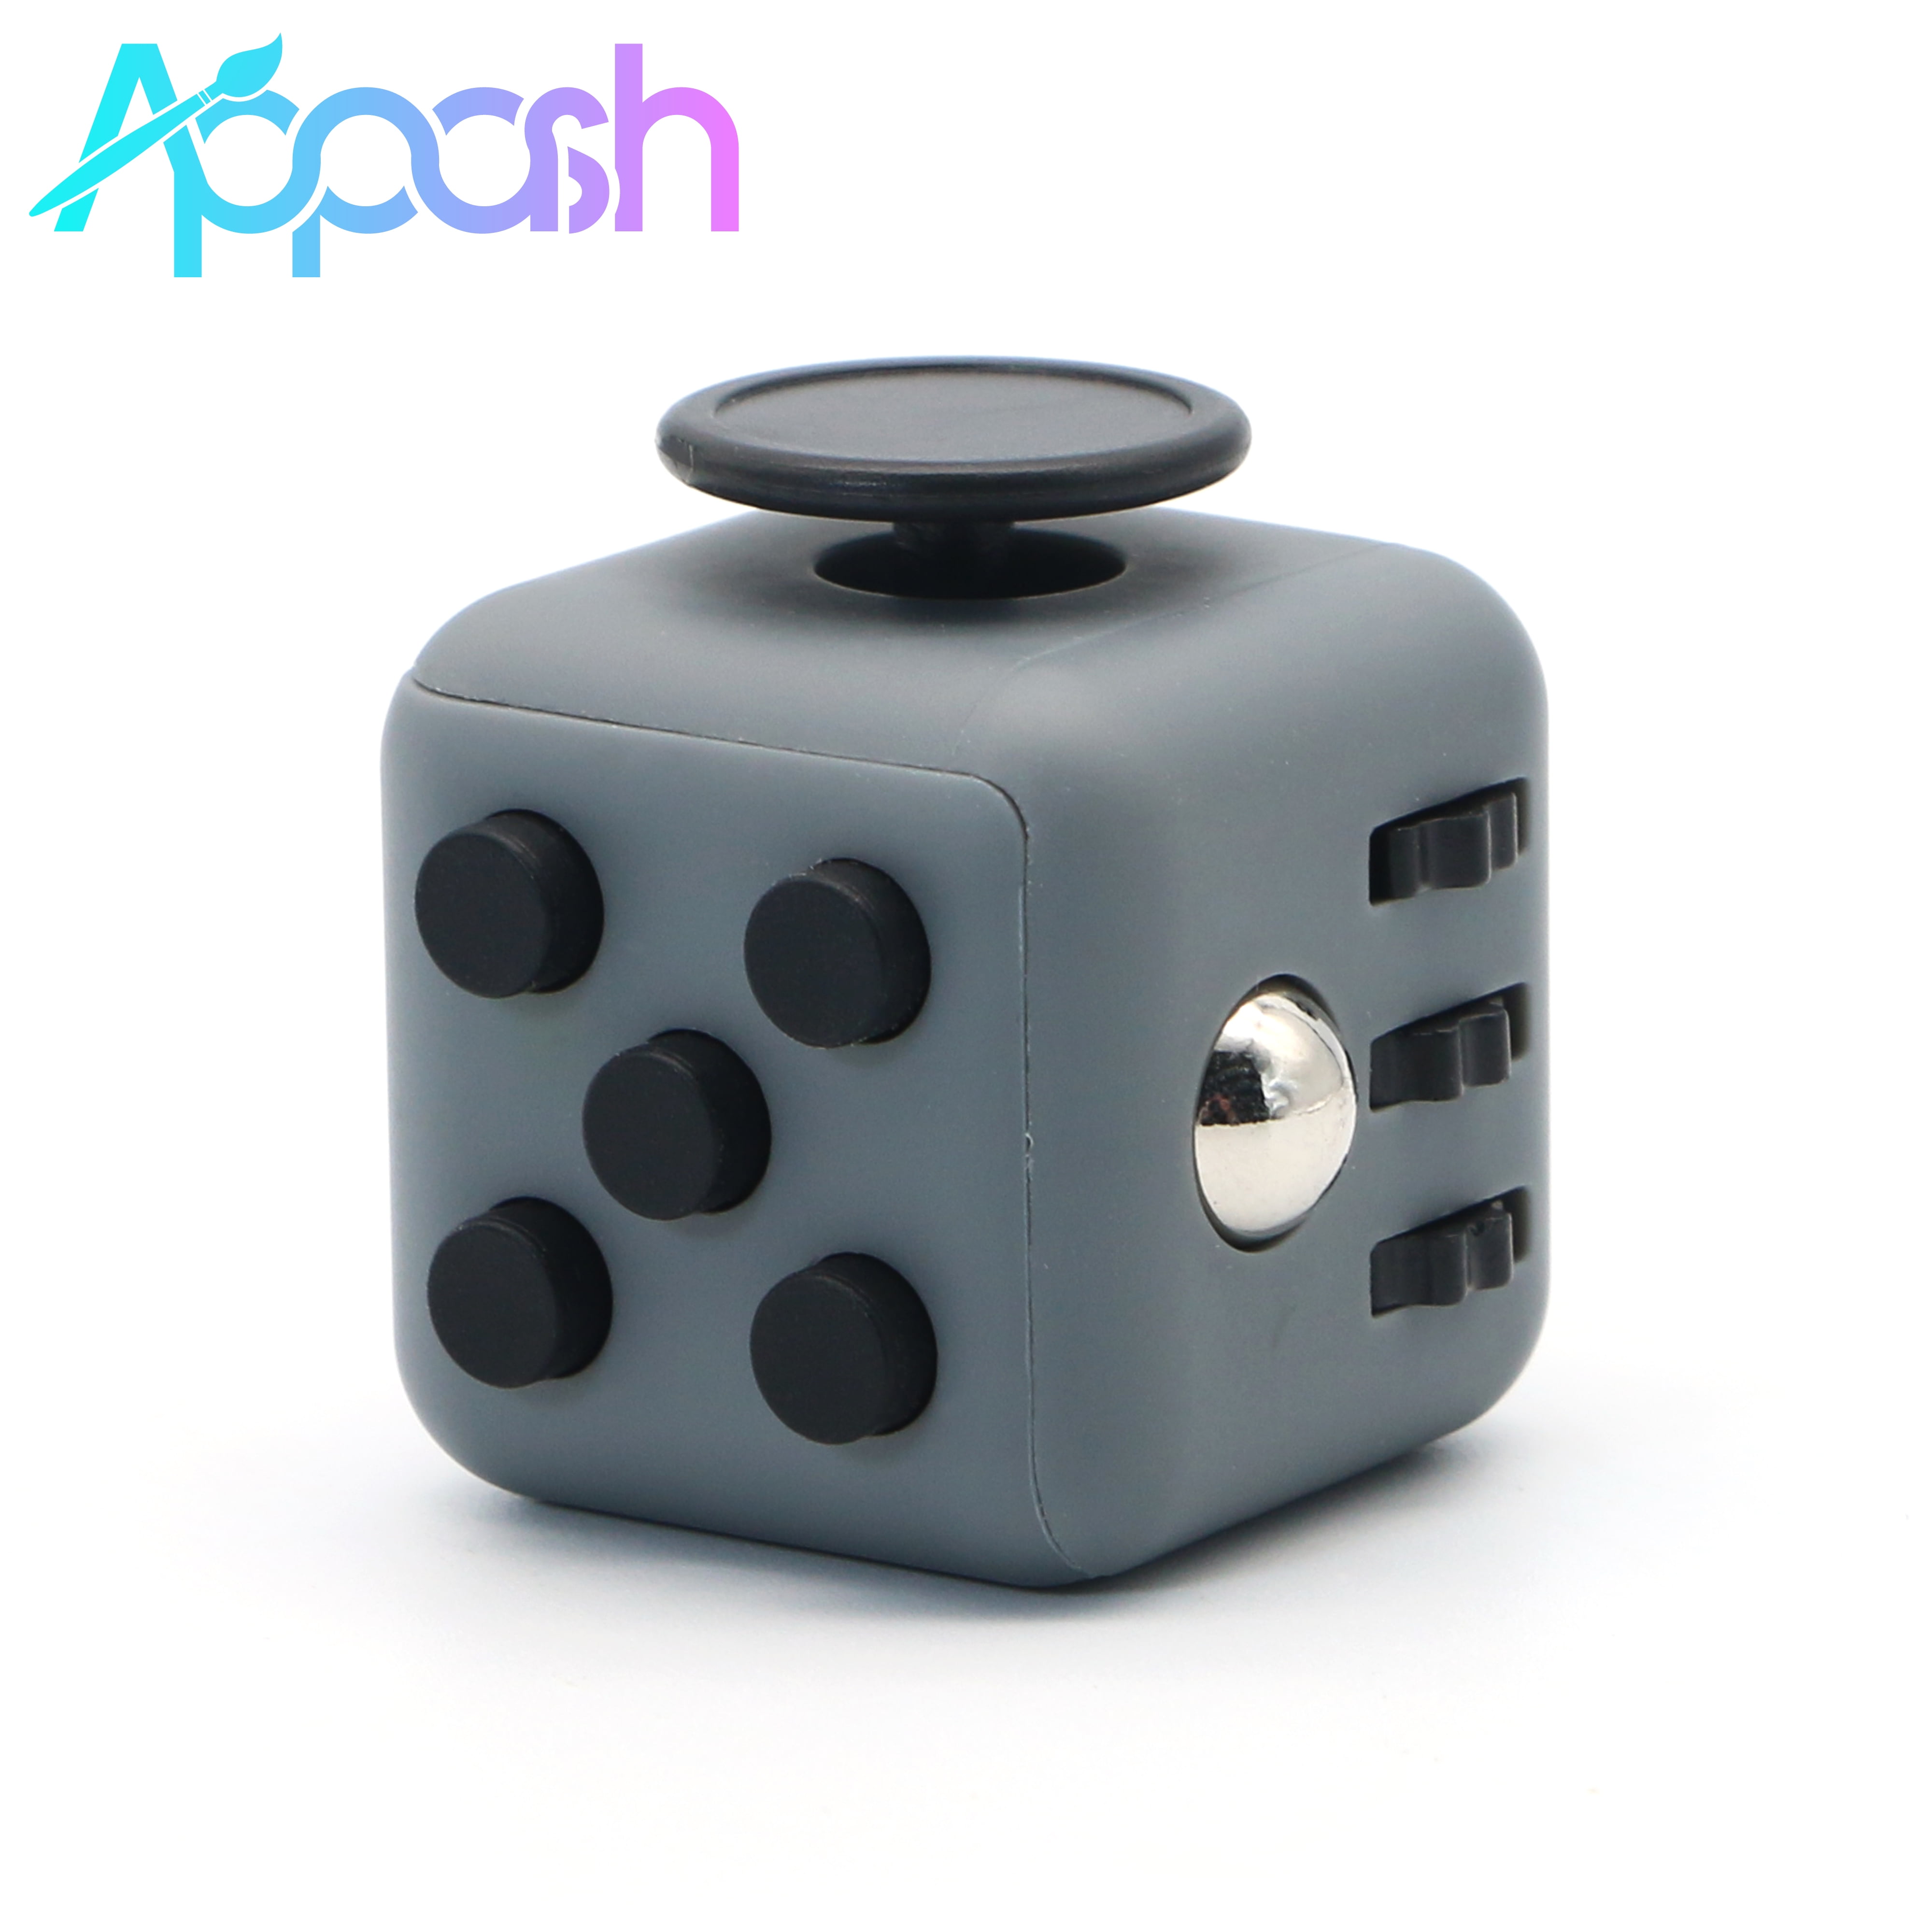 Fidget Cube Anxiety Pressure Relieving Toy Great Adults and Idea][Relaxing Toy][Stress Reliever][Soft Material] - Walmart.com